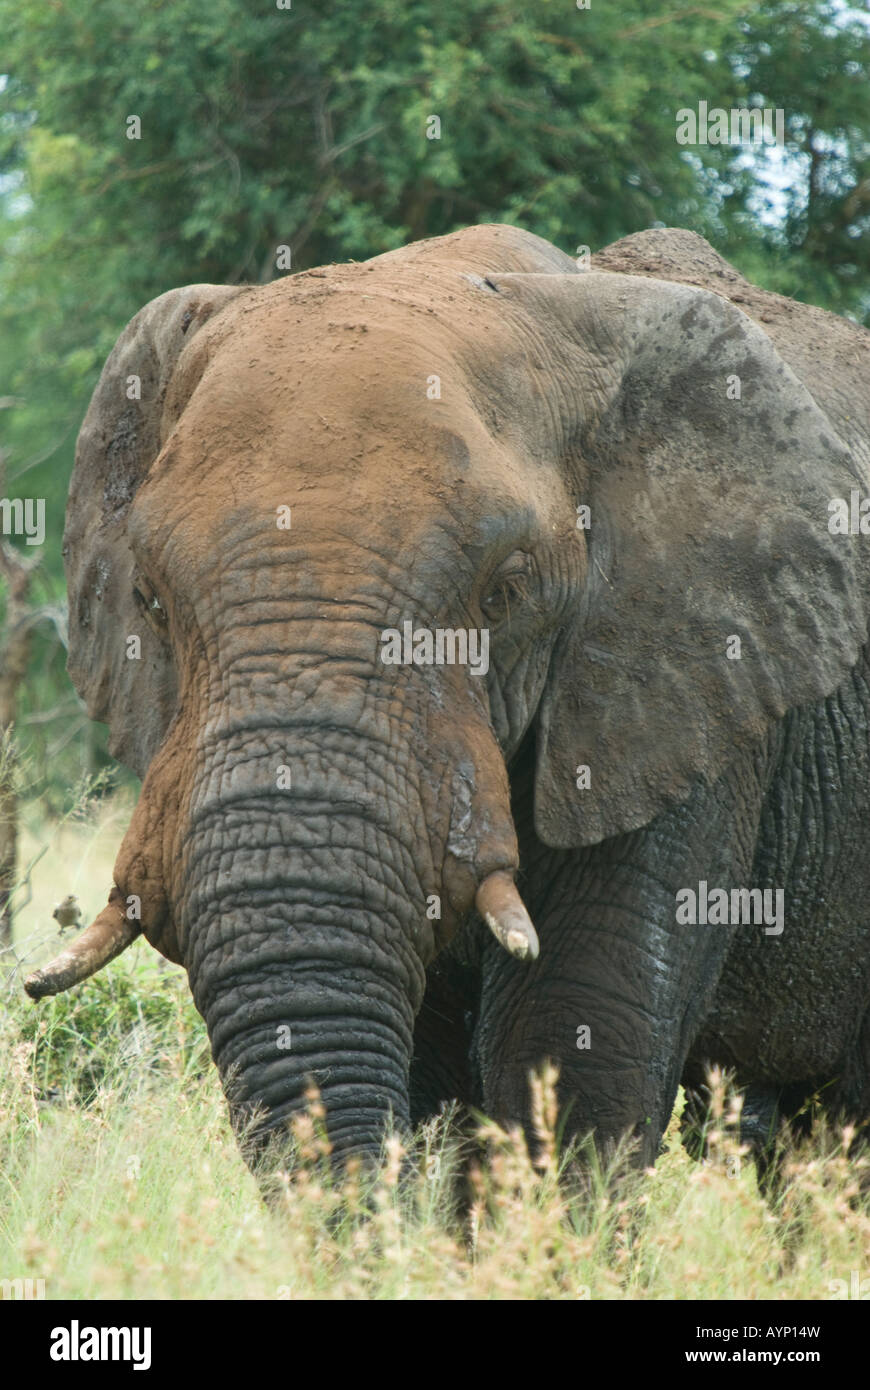 A large African elephant walking through the long grass in the African bush Stock Photo